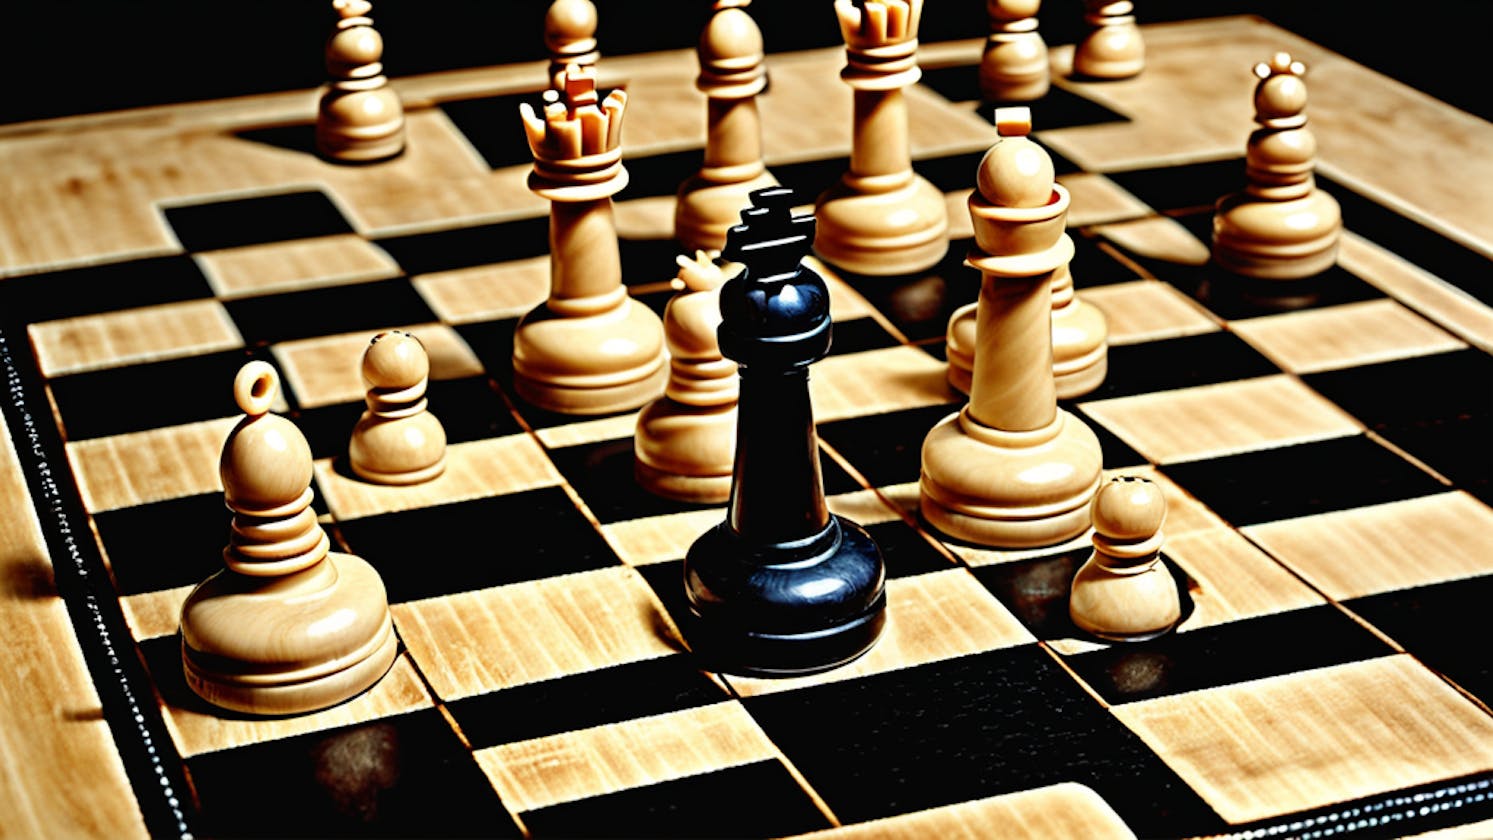 ChatGPT vs. Stockfish: The Battle of AI in Chess